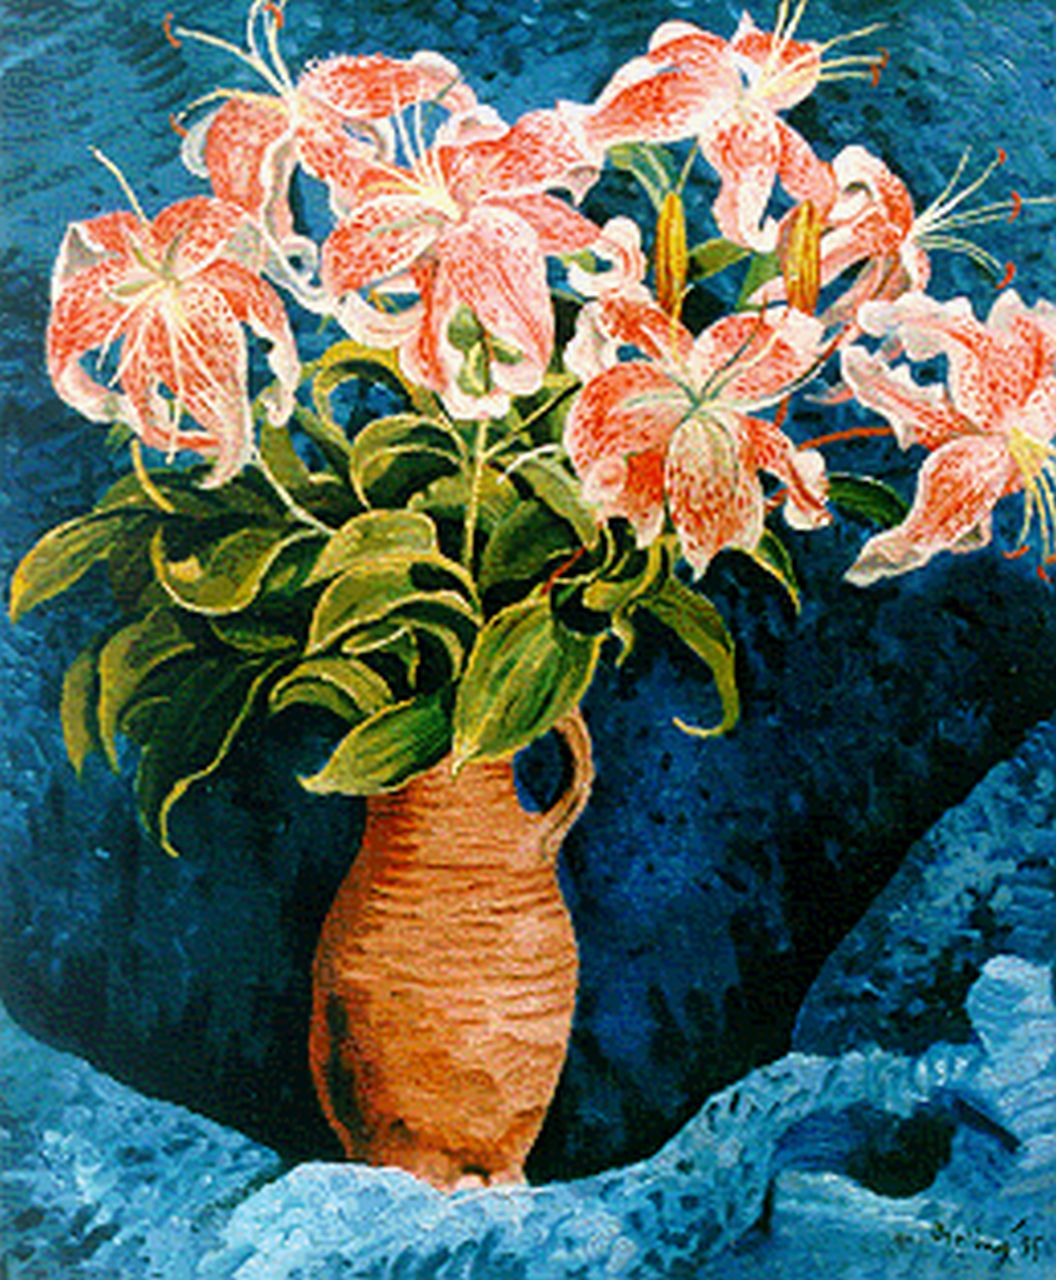 Bieling H.F.  | Hermann Friederich 'Herman' Bieling, Tiger-lilies in a vase, oil on canvas 60.0 x 49.8 cm, signed l.r. and dated '35